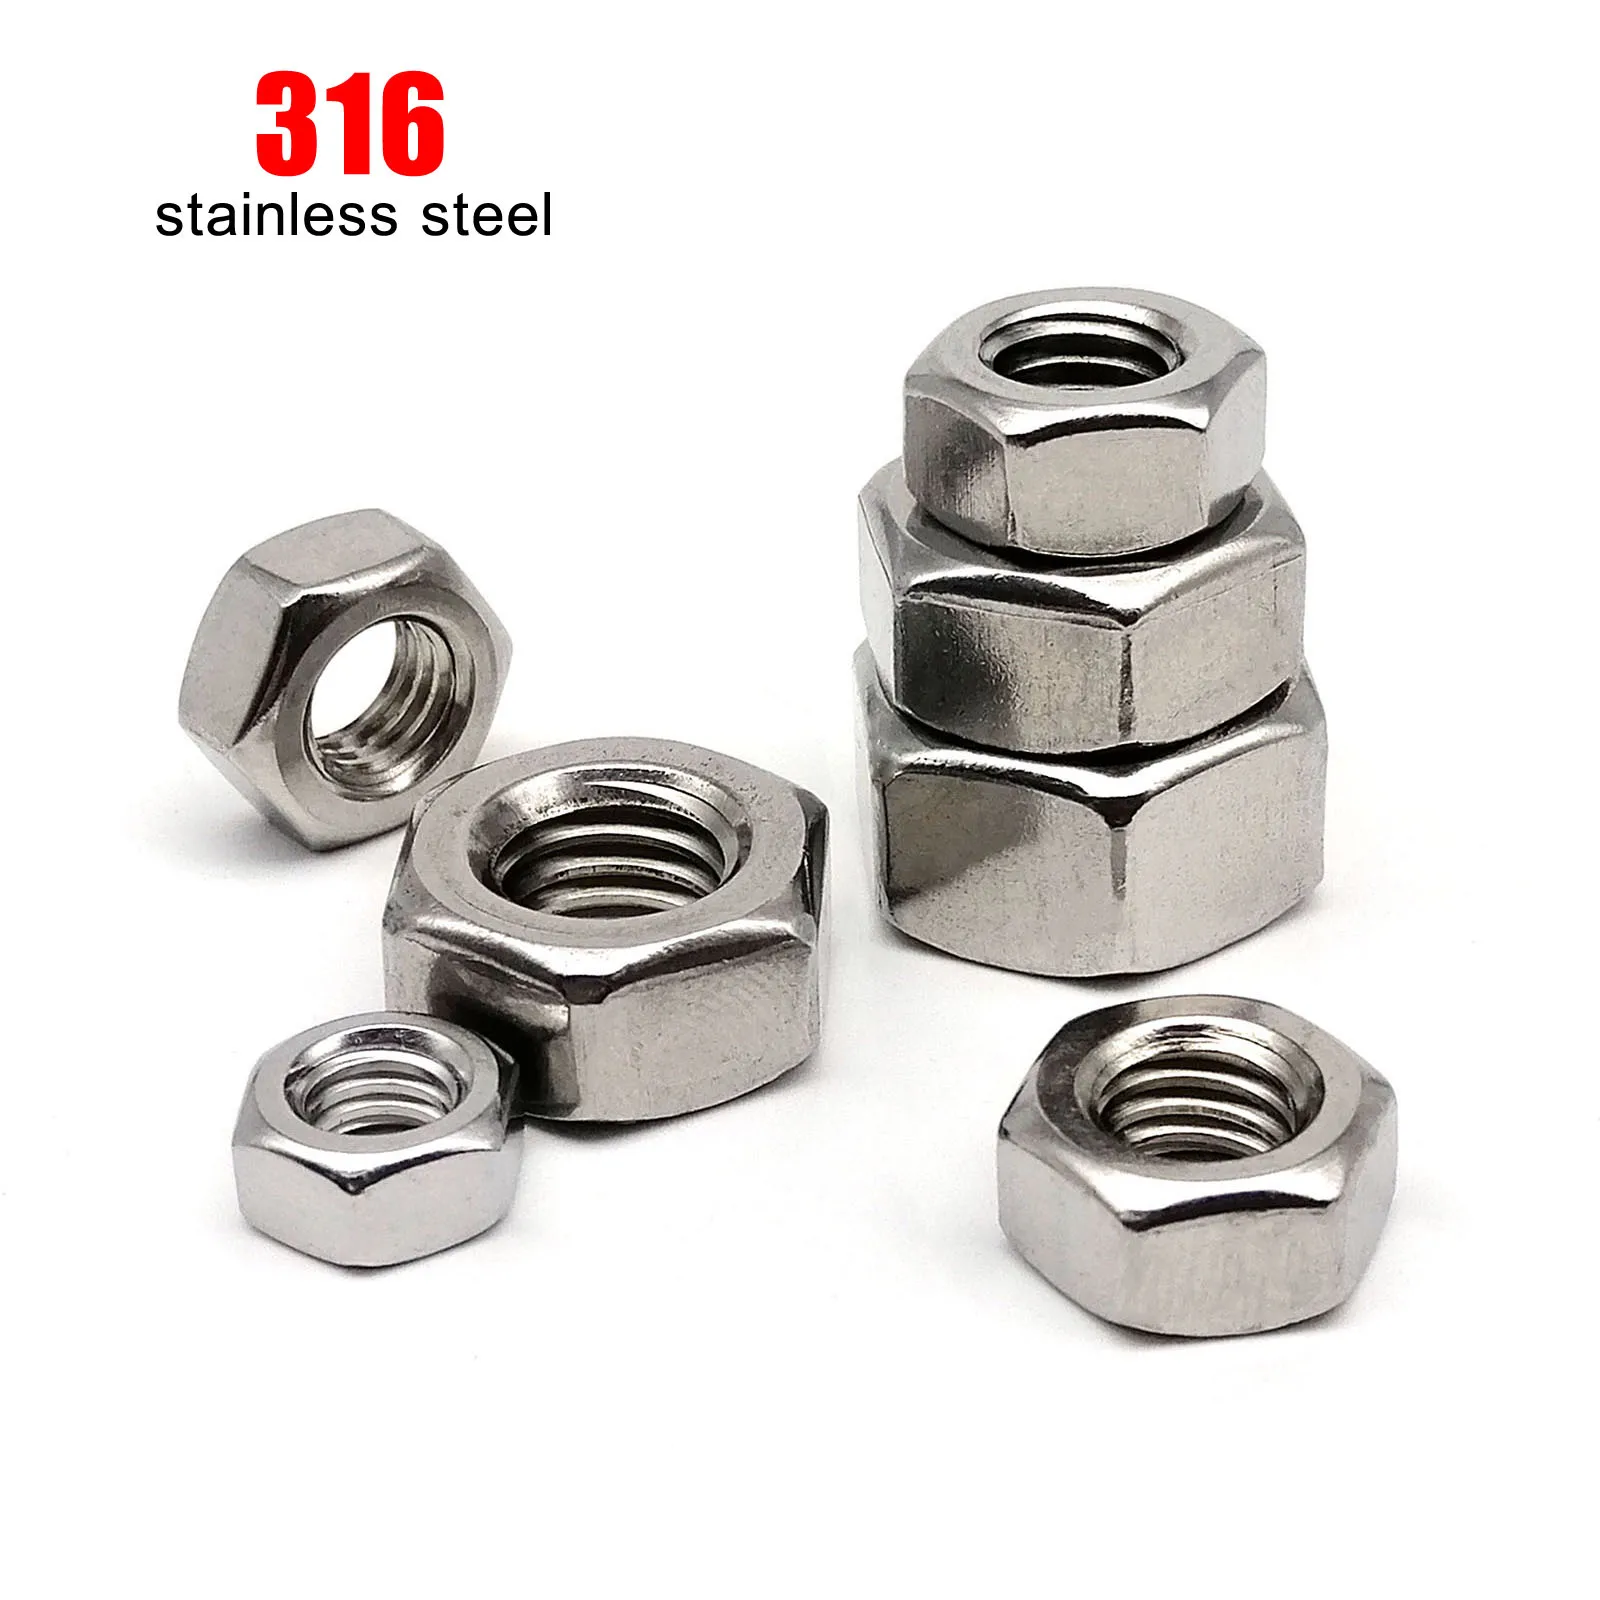 

1/2/5/10/50pcs Metric Thread M3 M4 M5 M6 M8 M10 M12 M14 M16 M18 M20 M22 M24 DIN934 316 A4 Stainless Steel Hex Hexagon Nut